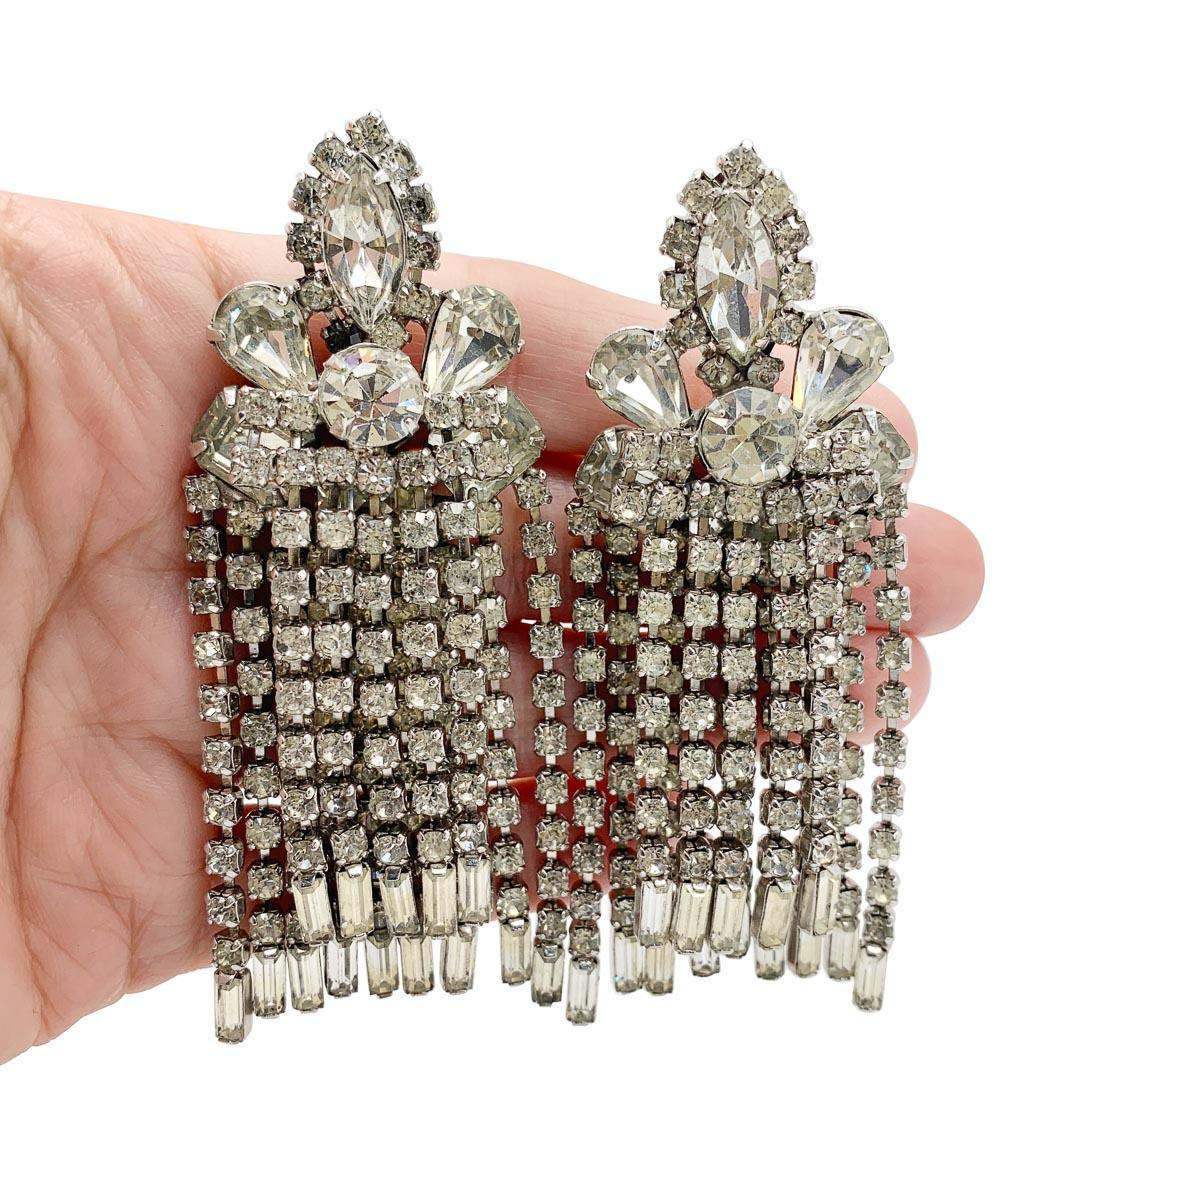 A spectacular pair of Vintage Kramer Chandelier Earrings from the 1950s. Featuring oodles of gorgeous fancy cut stones including pear, marquise, chatons and emeralds cuts. A double layer of tassels finished in baguette cut stones drops away from the